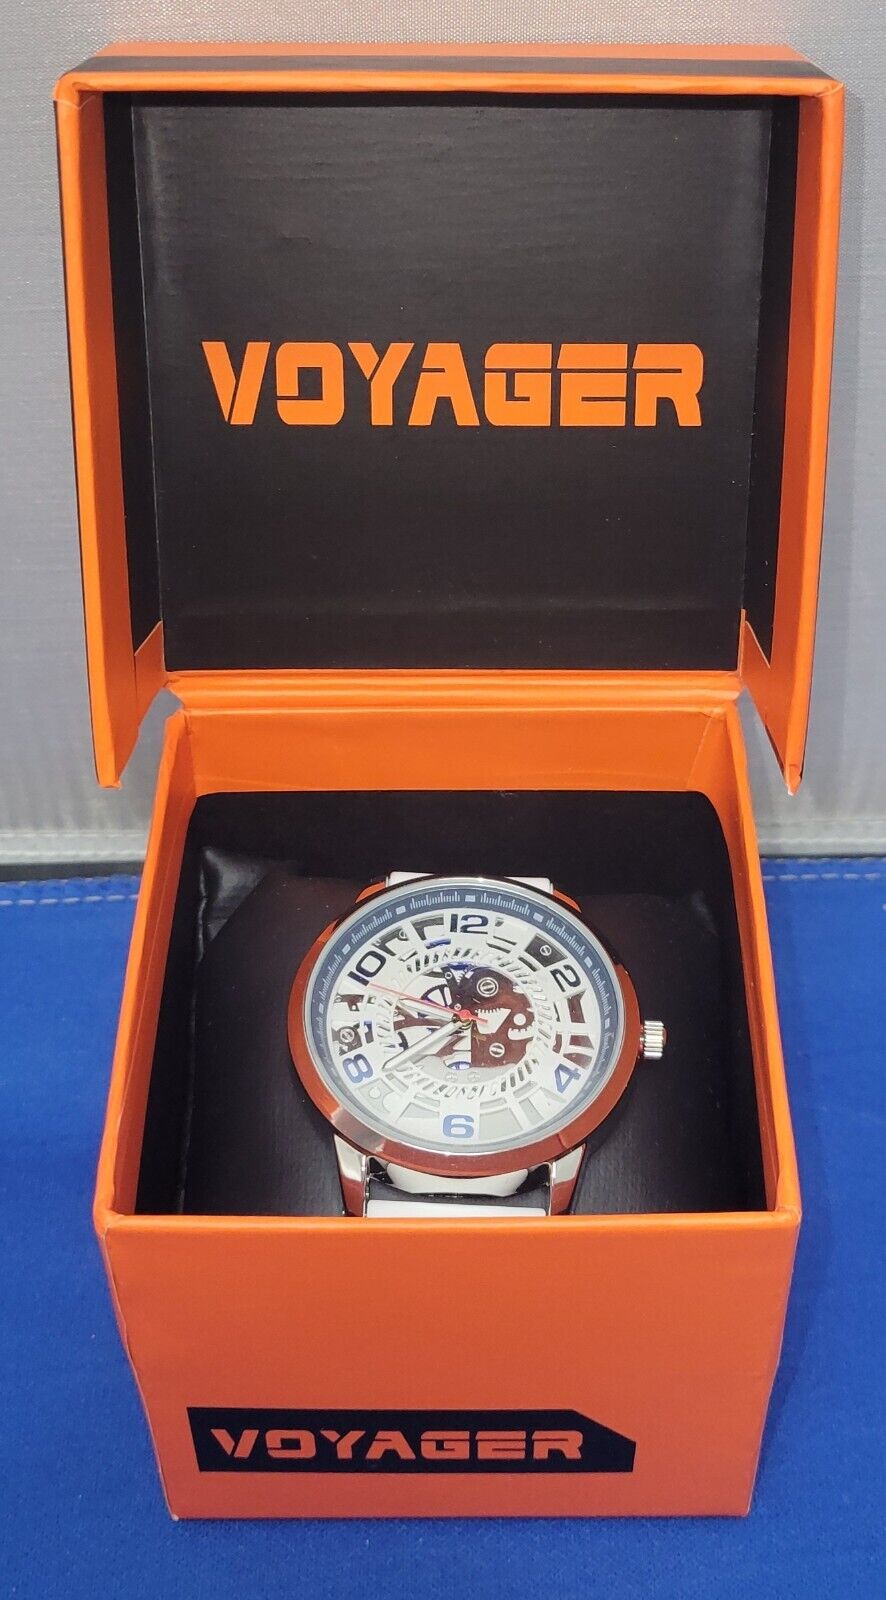 Voyager The Apollo 11 Space Suit Watch